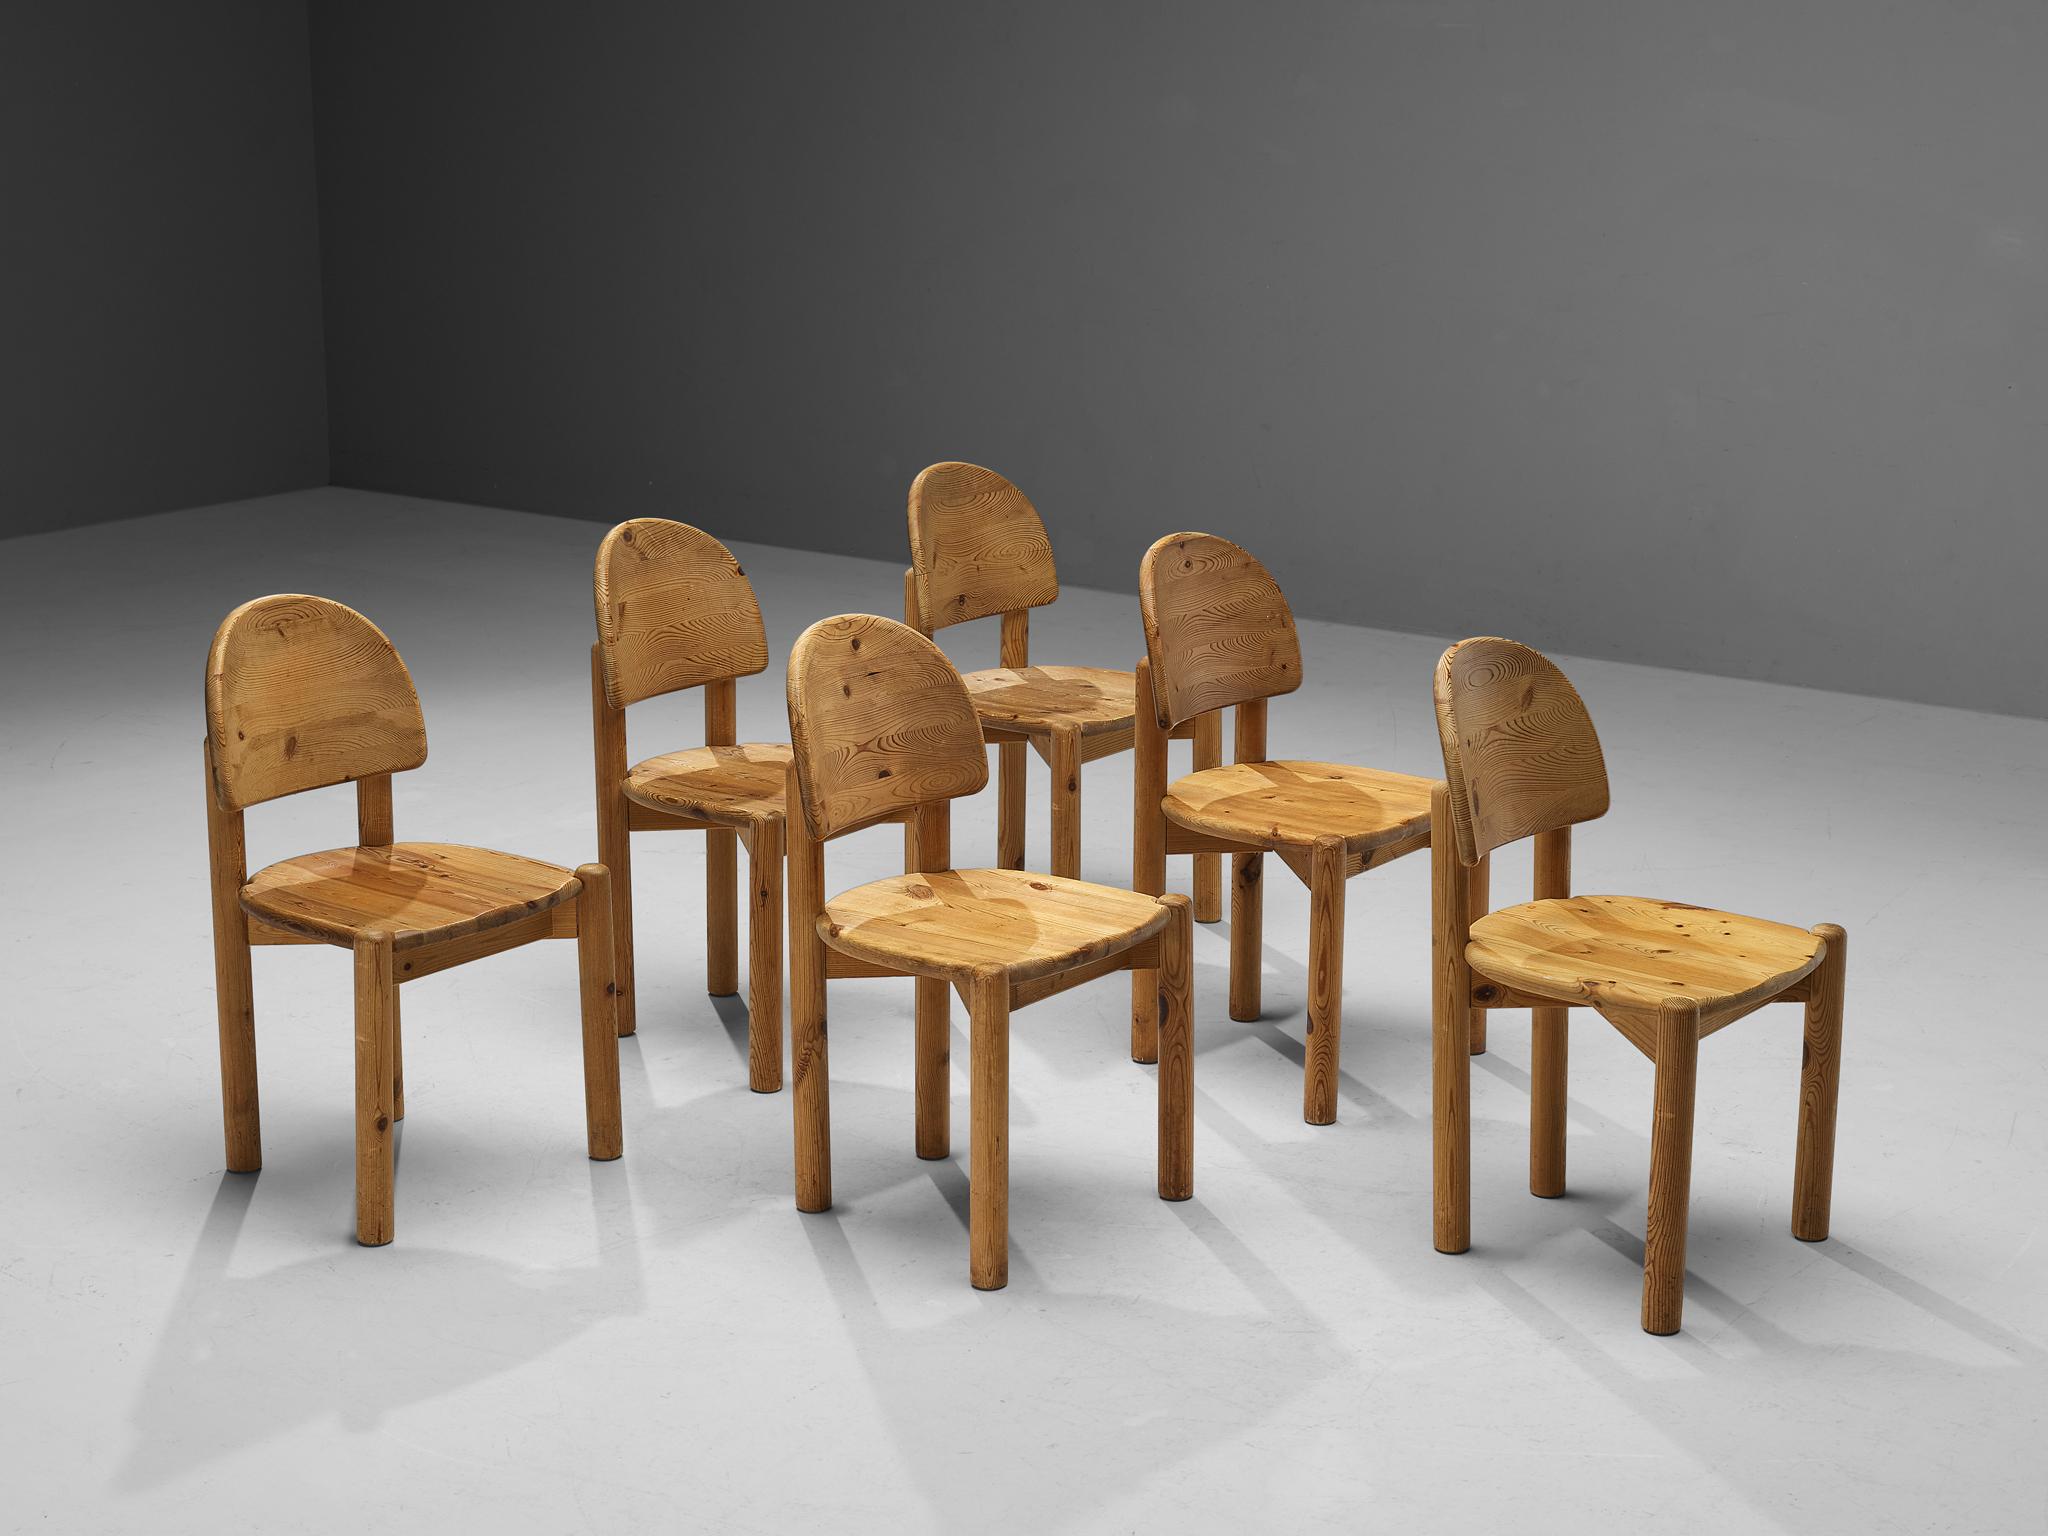 Rainer Daumiller for Hirtshals Sawmill, set of six dining chairs, pine, Denmark, 1970s

Beautiful, organic and natural dining chairs in solid pine designed by Rainer Daumiller. A simplistic design with a round seating and attention for the natural